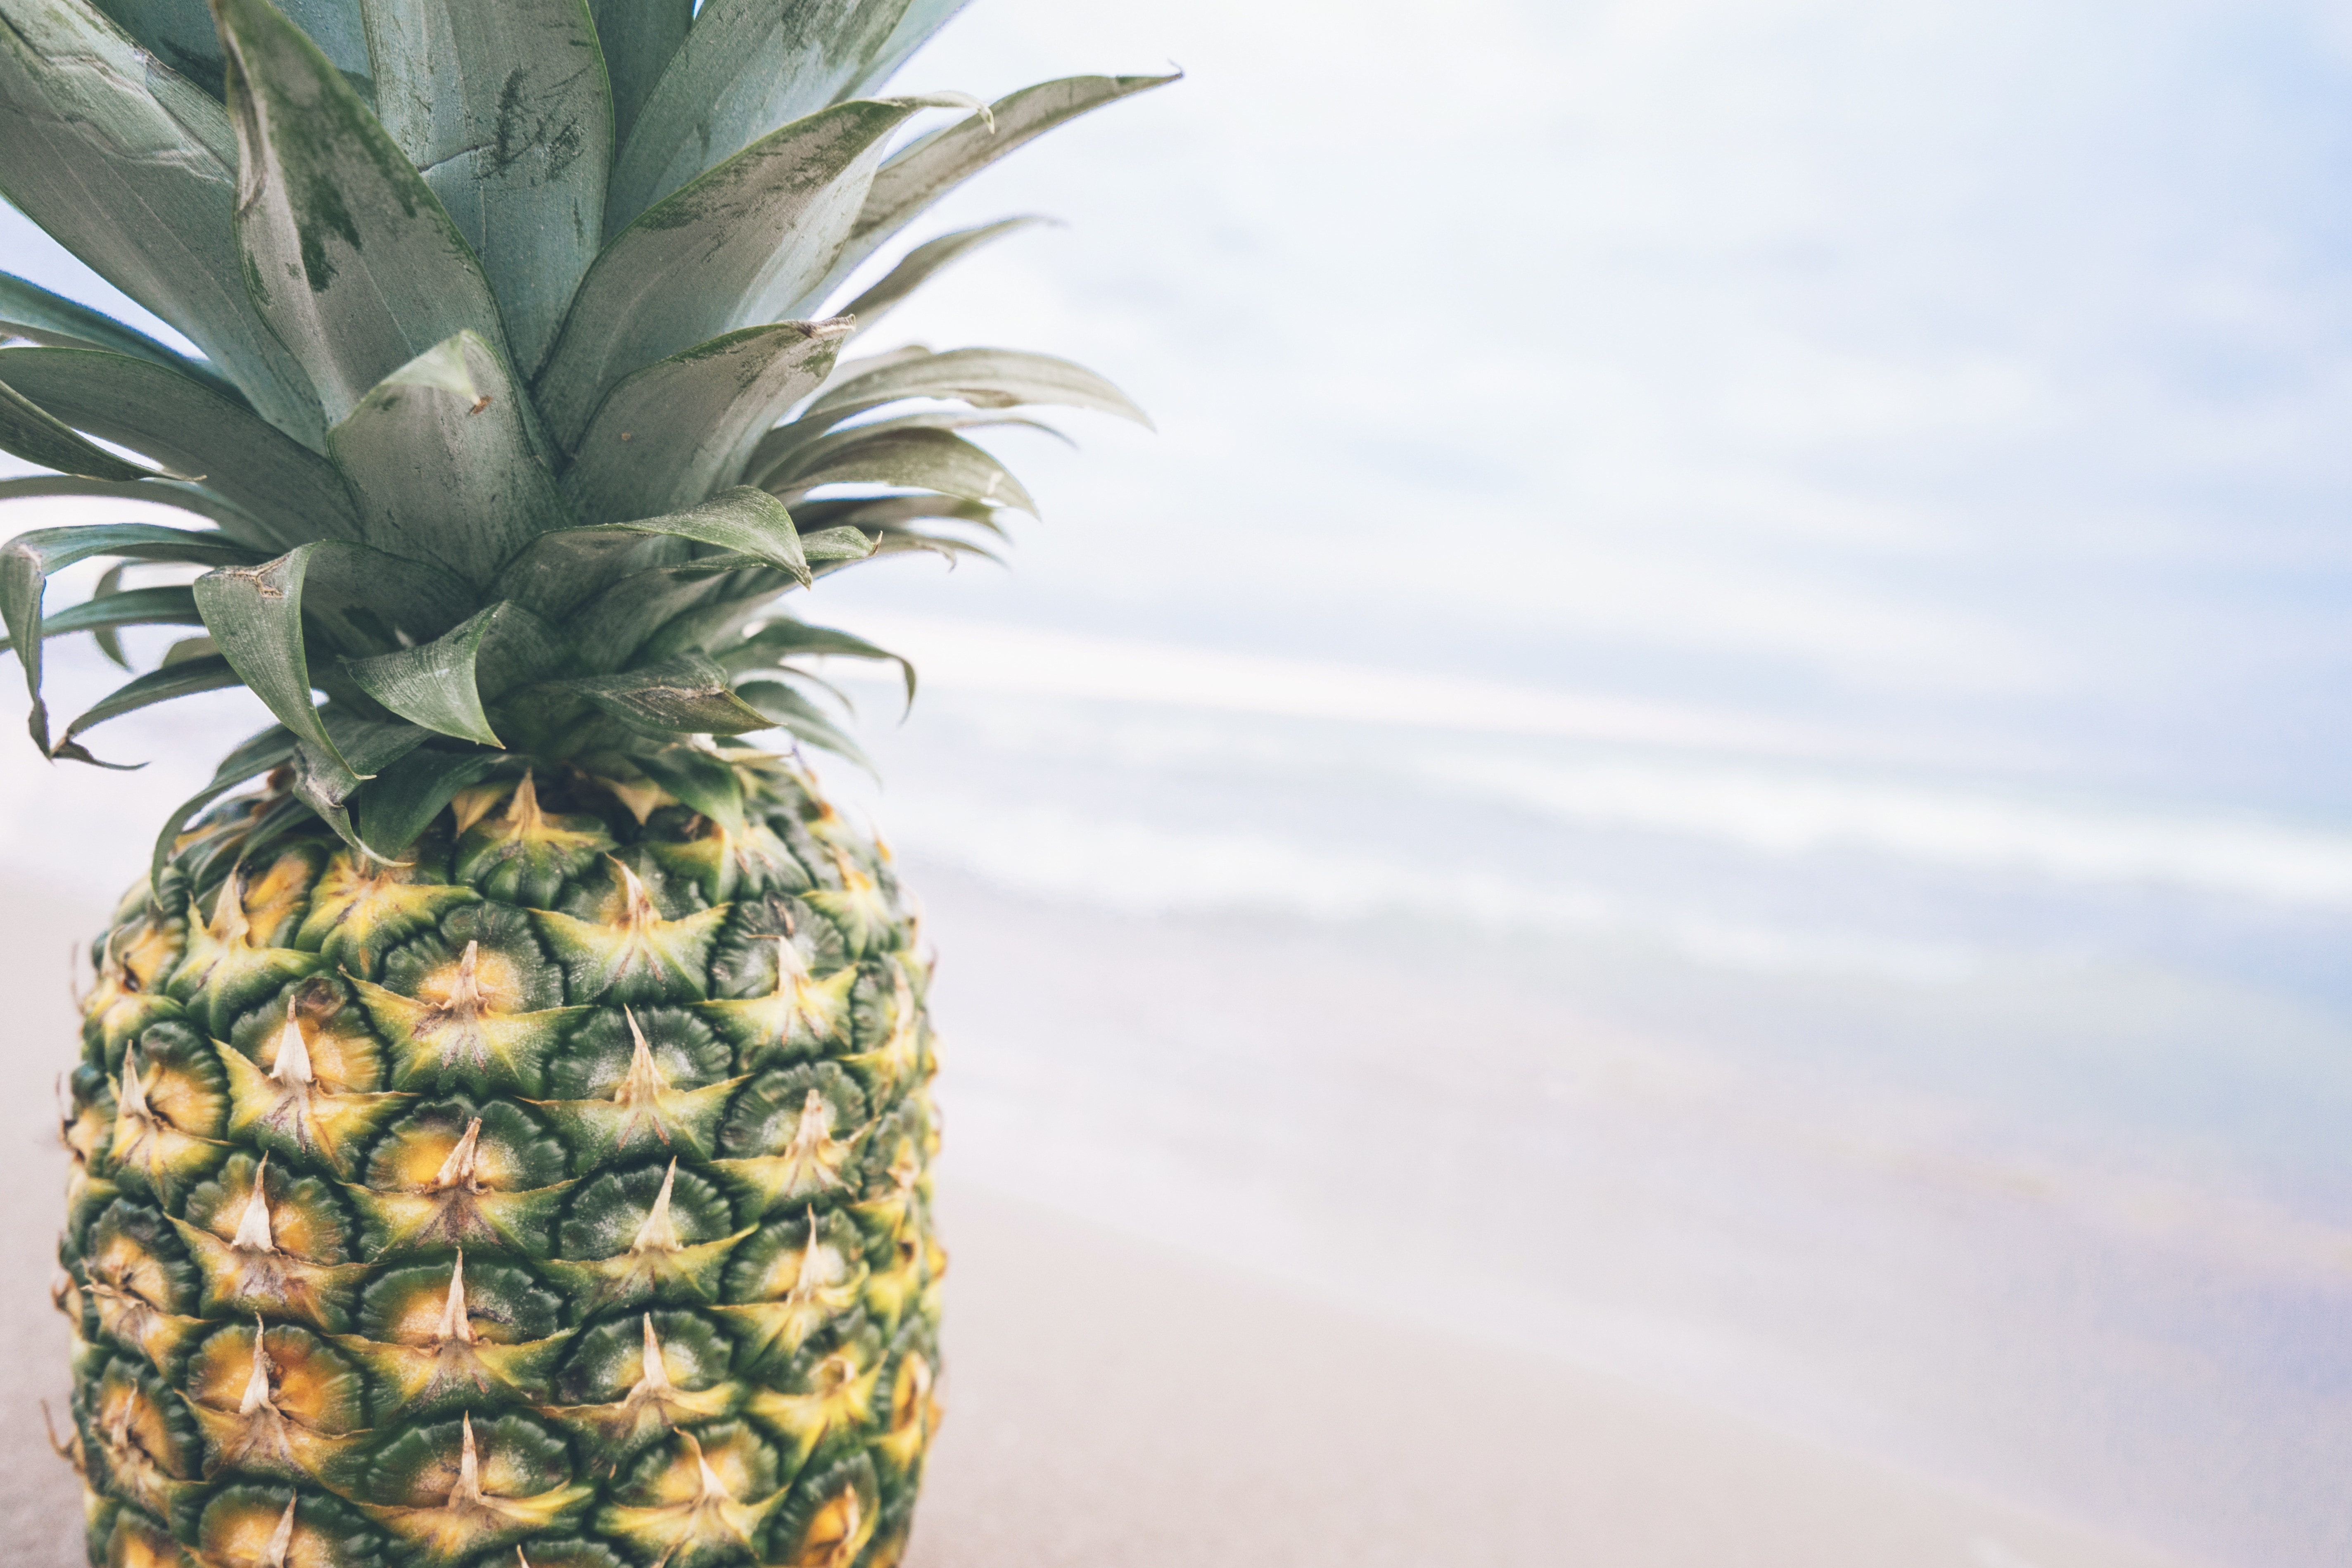 shallow focus photography of yellow and green pineapple beside body of water